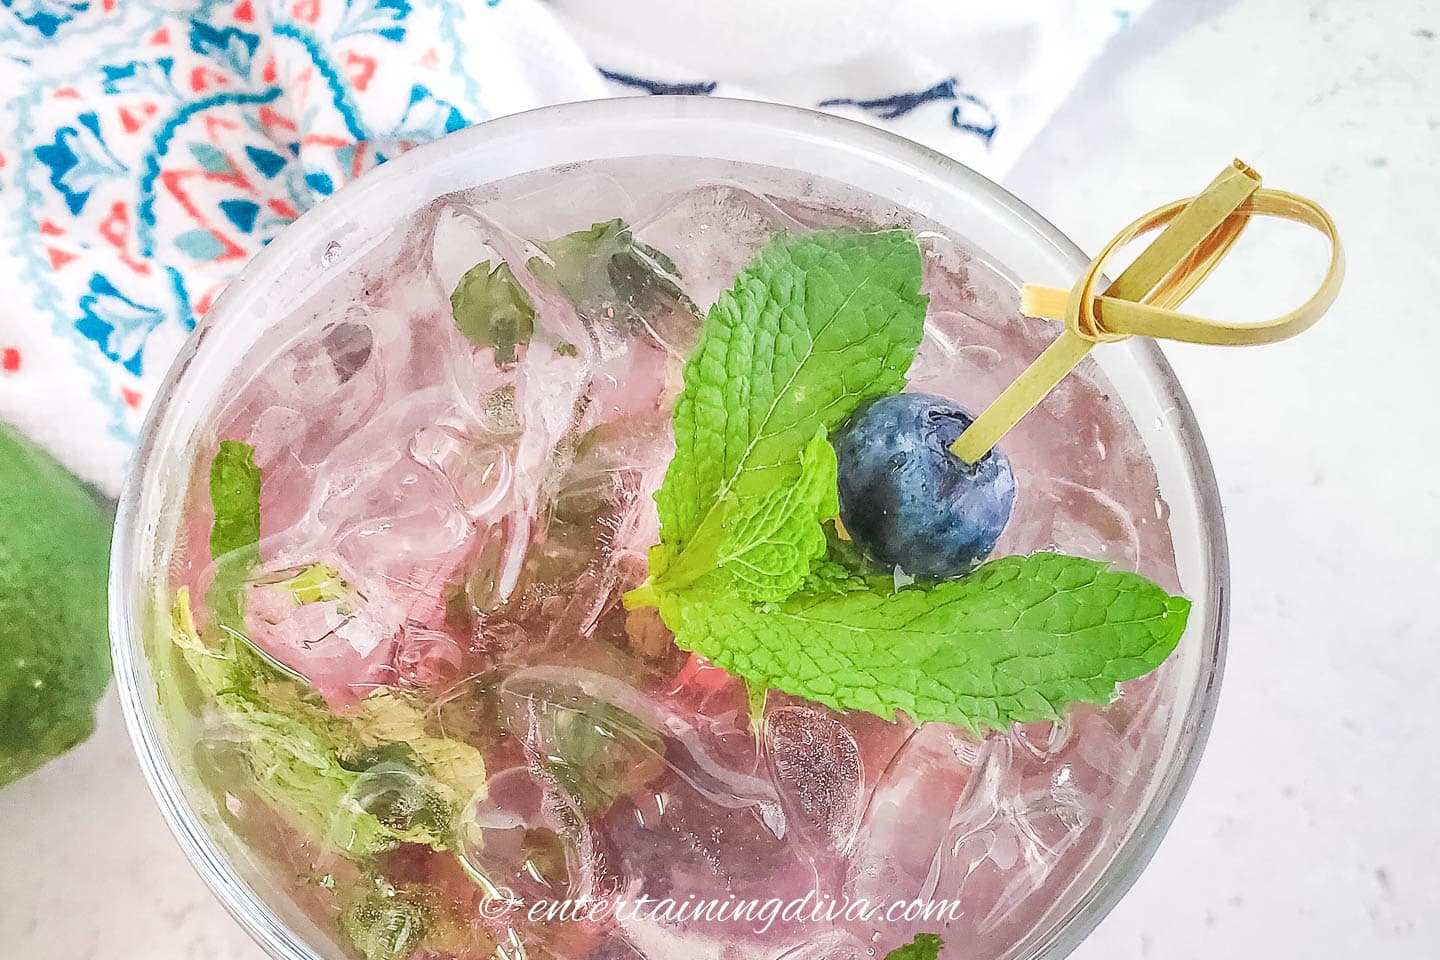 Mint leaves and a blueberry garnish on top of a blueberry mojito